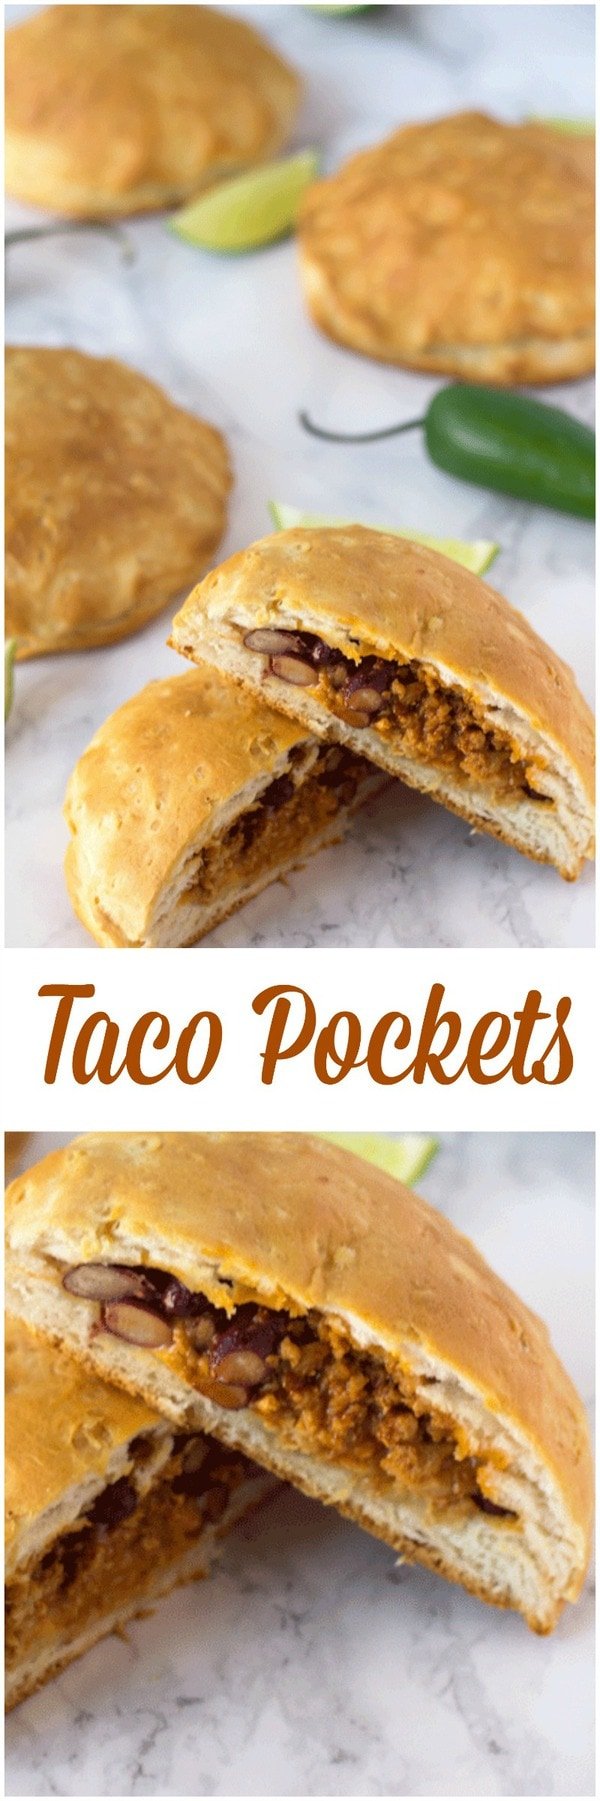 Taco pockets are so easy to make! Eat your Tacos in a fun way with this easy Taco Pocket Recipe can be stuffed with your favorite taco toppings for a tasty taco dinner! #Taco #TacoRecipe #TacoDinner #Tacos